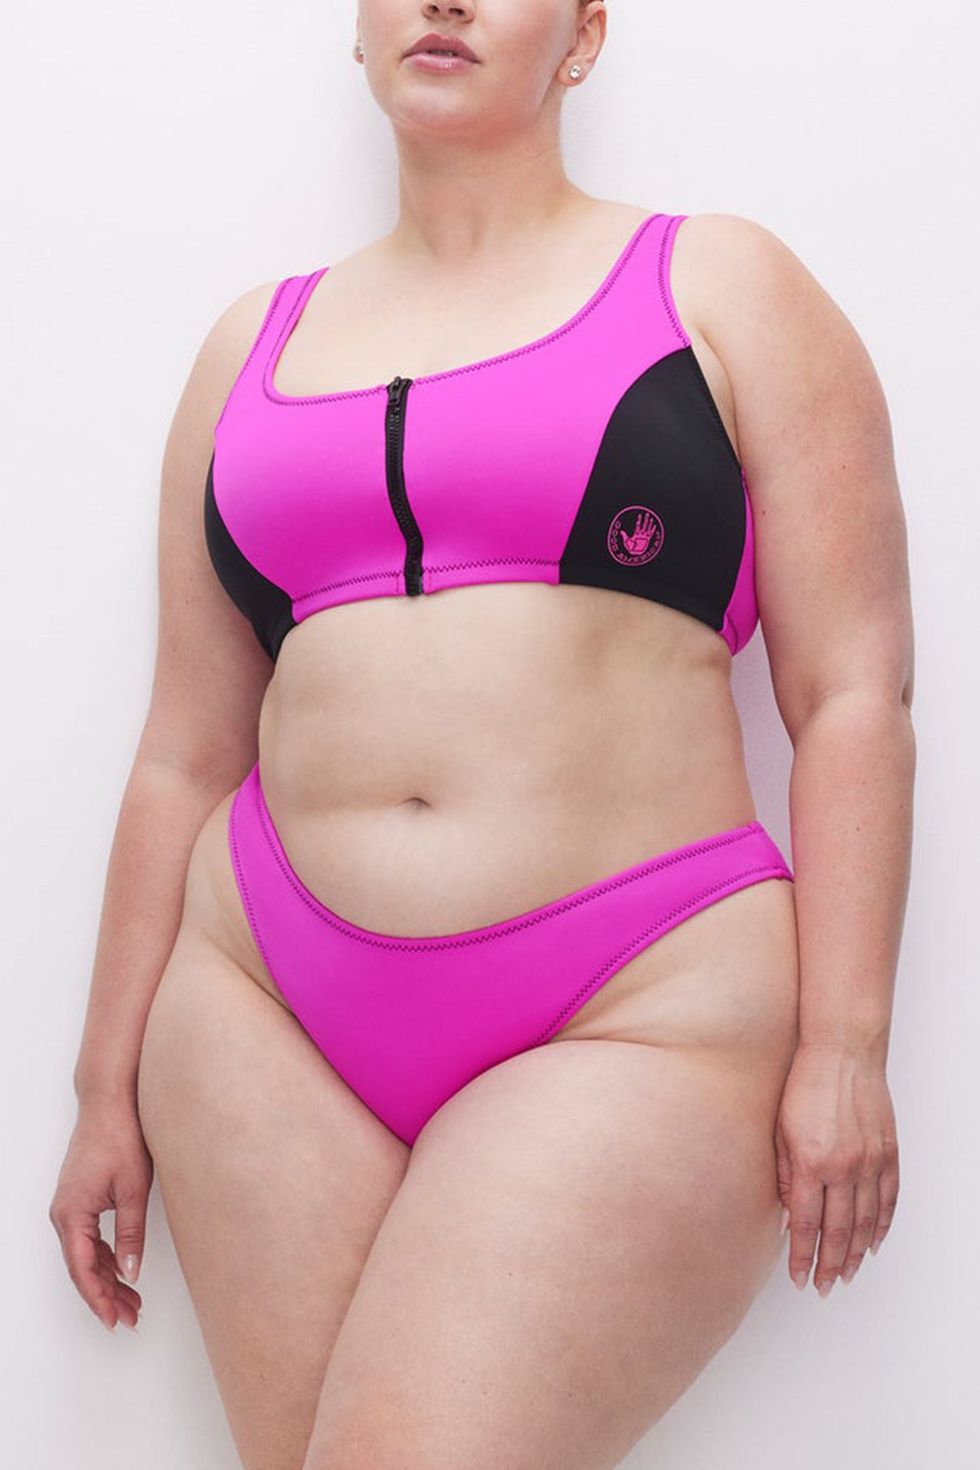 Bathing suits that make your breasts look bigger